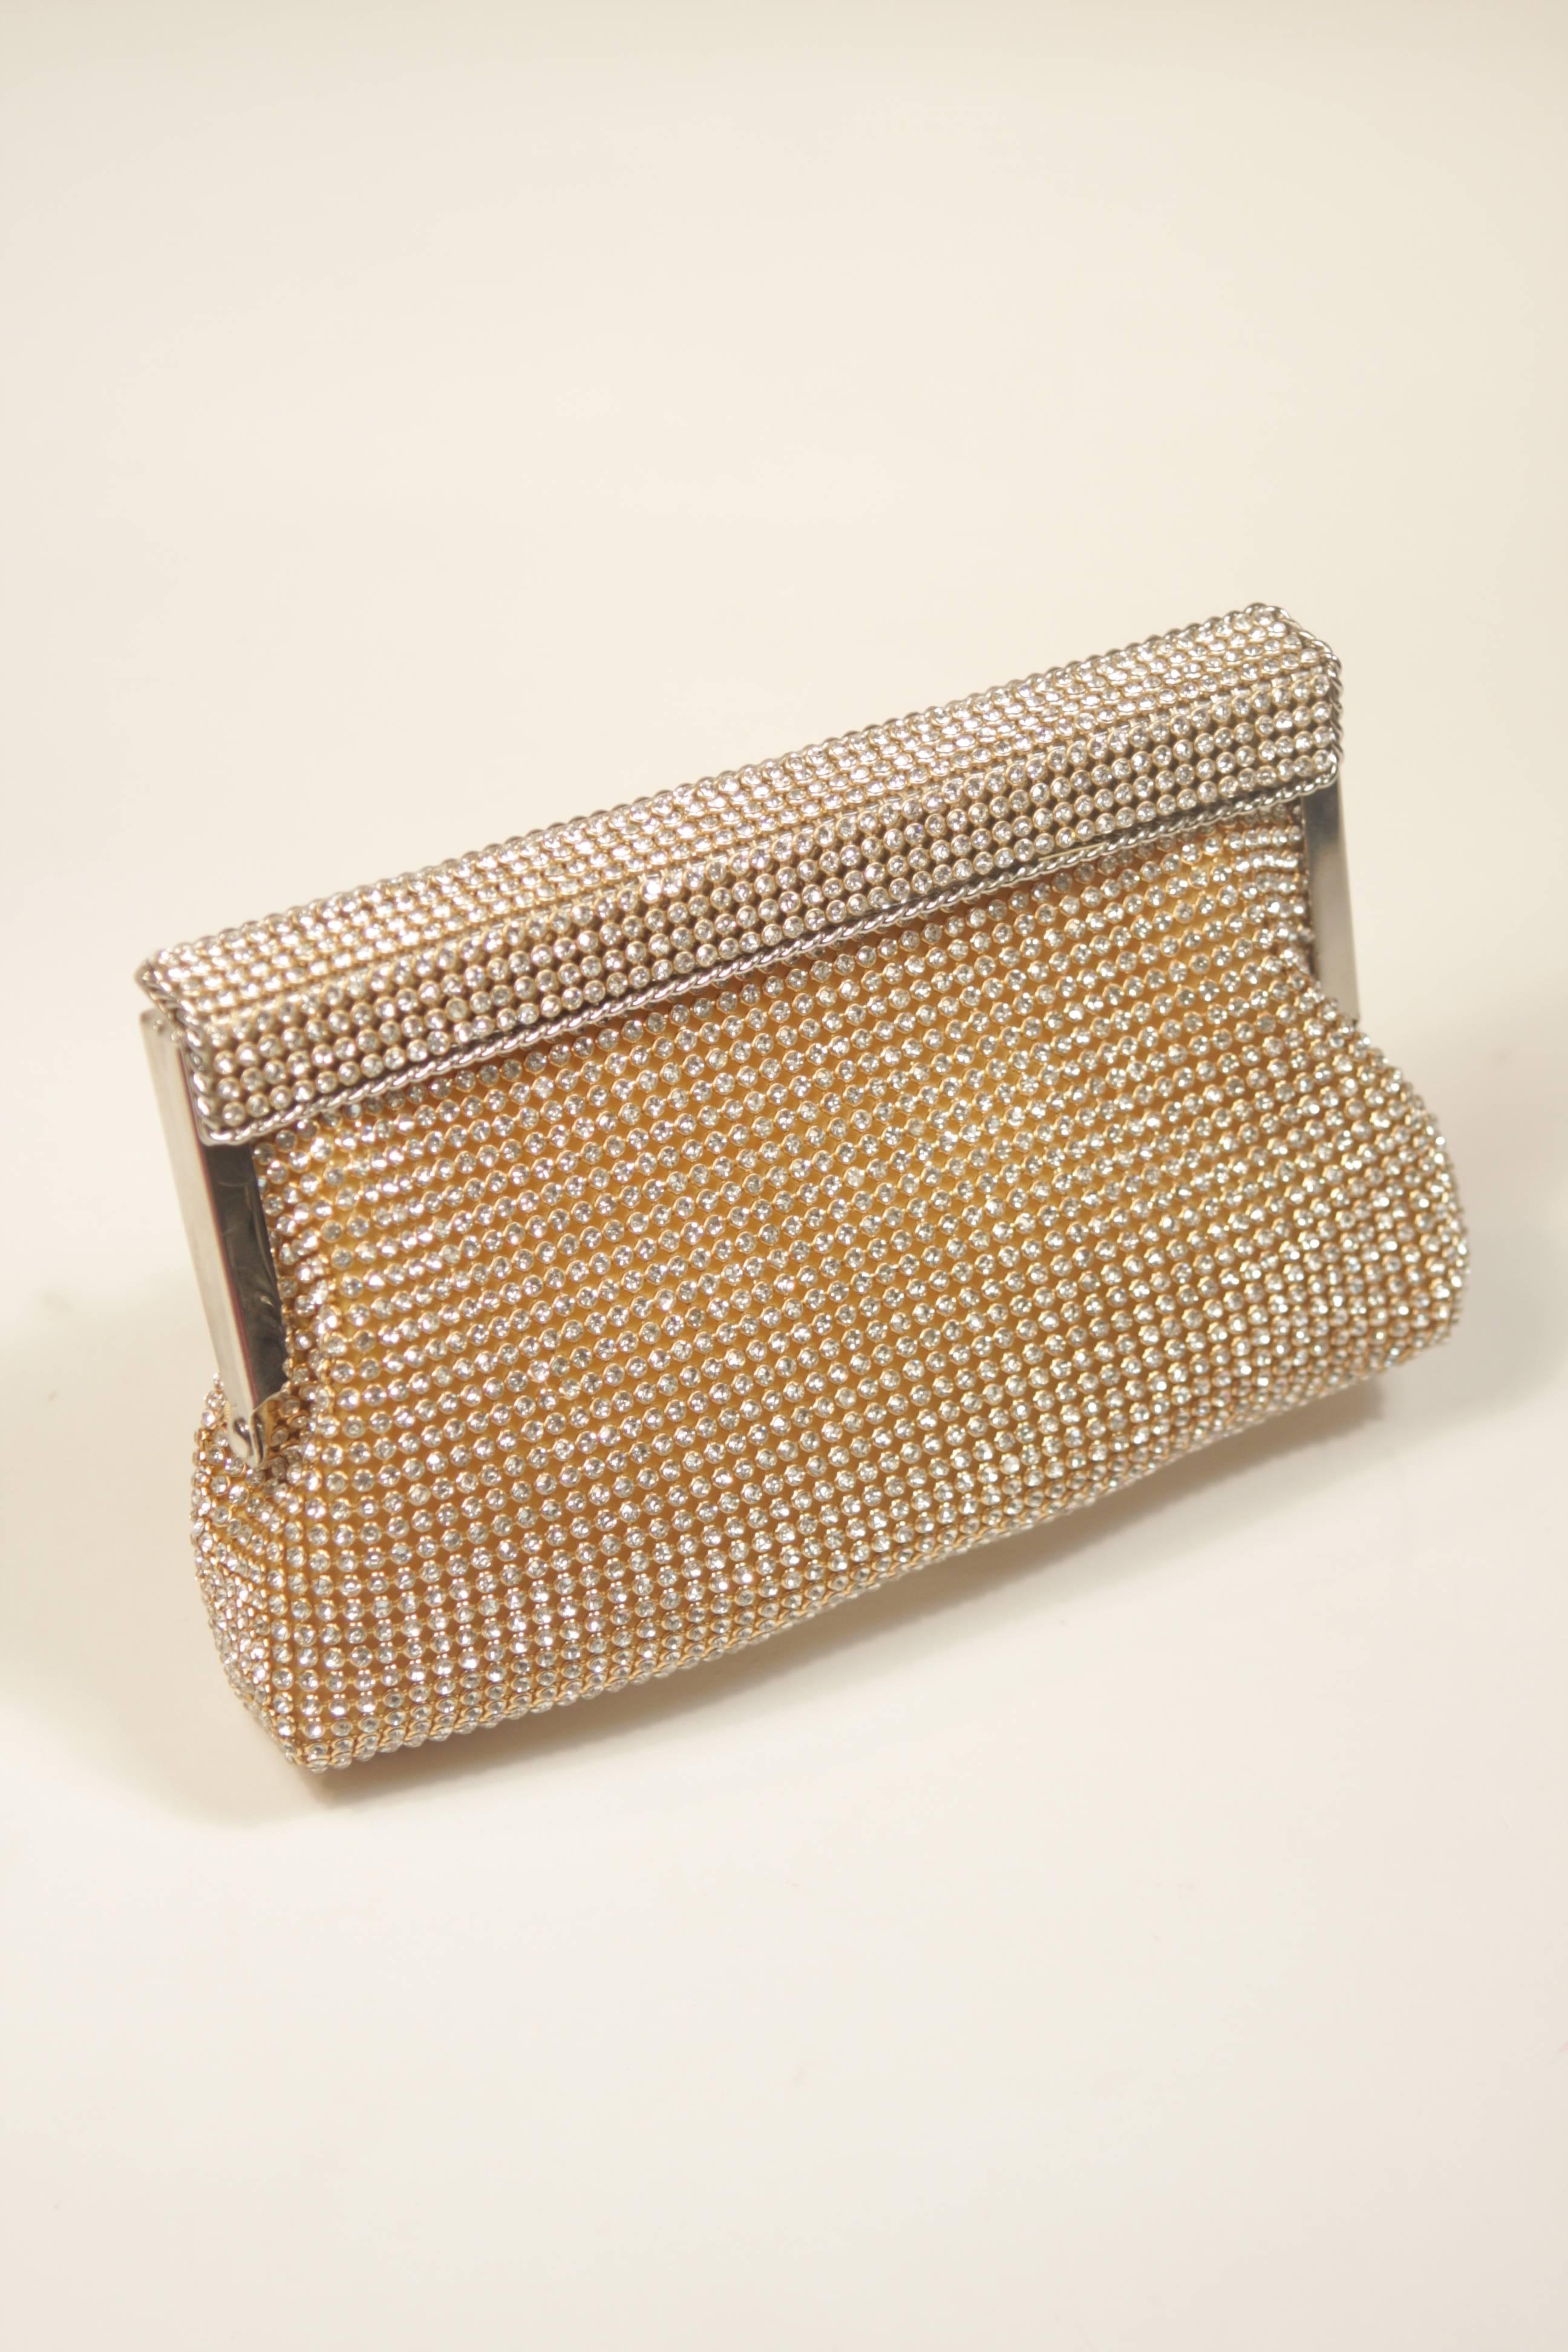 ELIZABETH MASON COUTURE Rhinestone Frame Clutch In New Condition For Sale In Los Angeles, CA